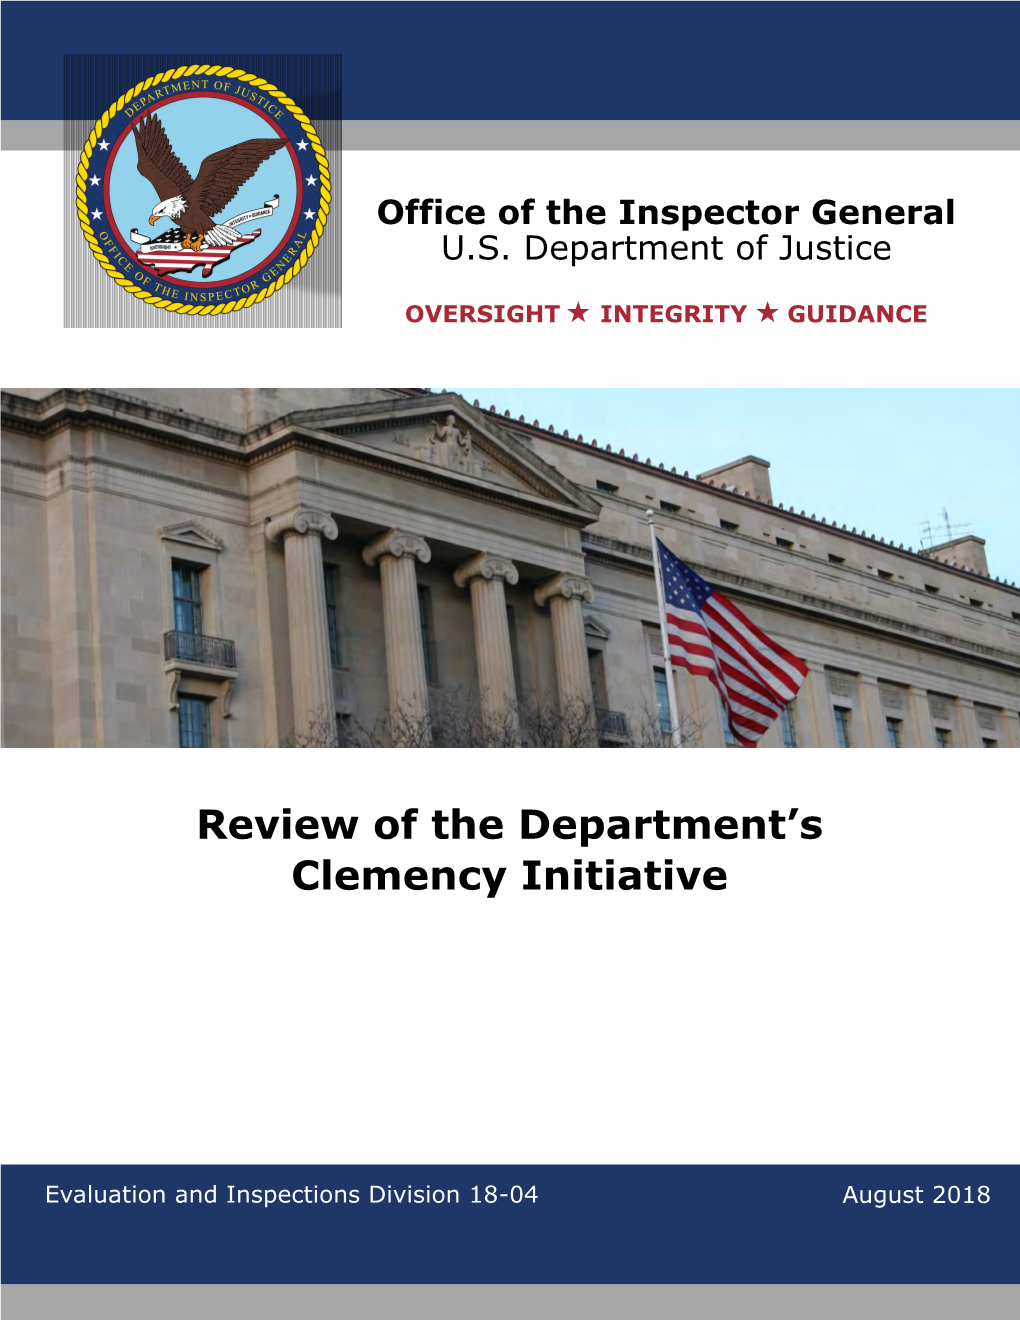 Review of the Department's Clemency Initiative